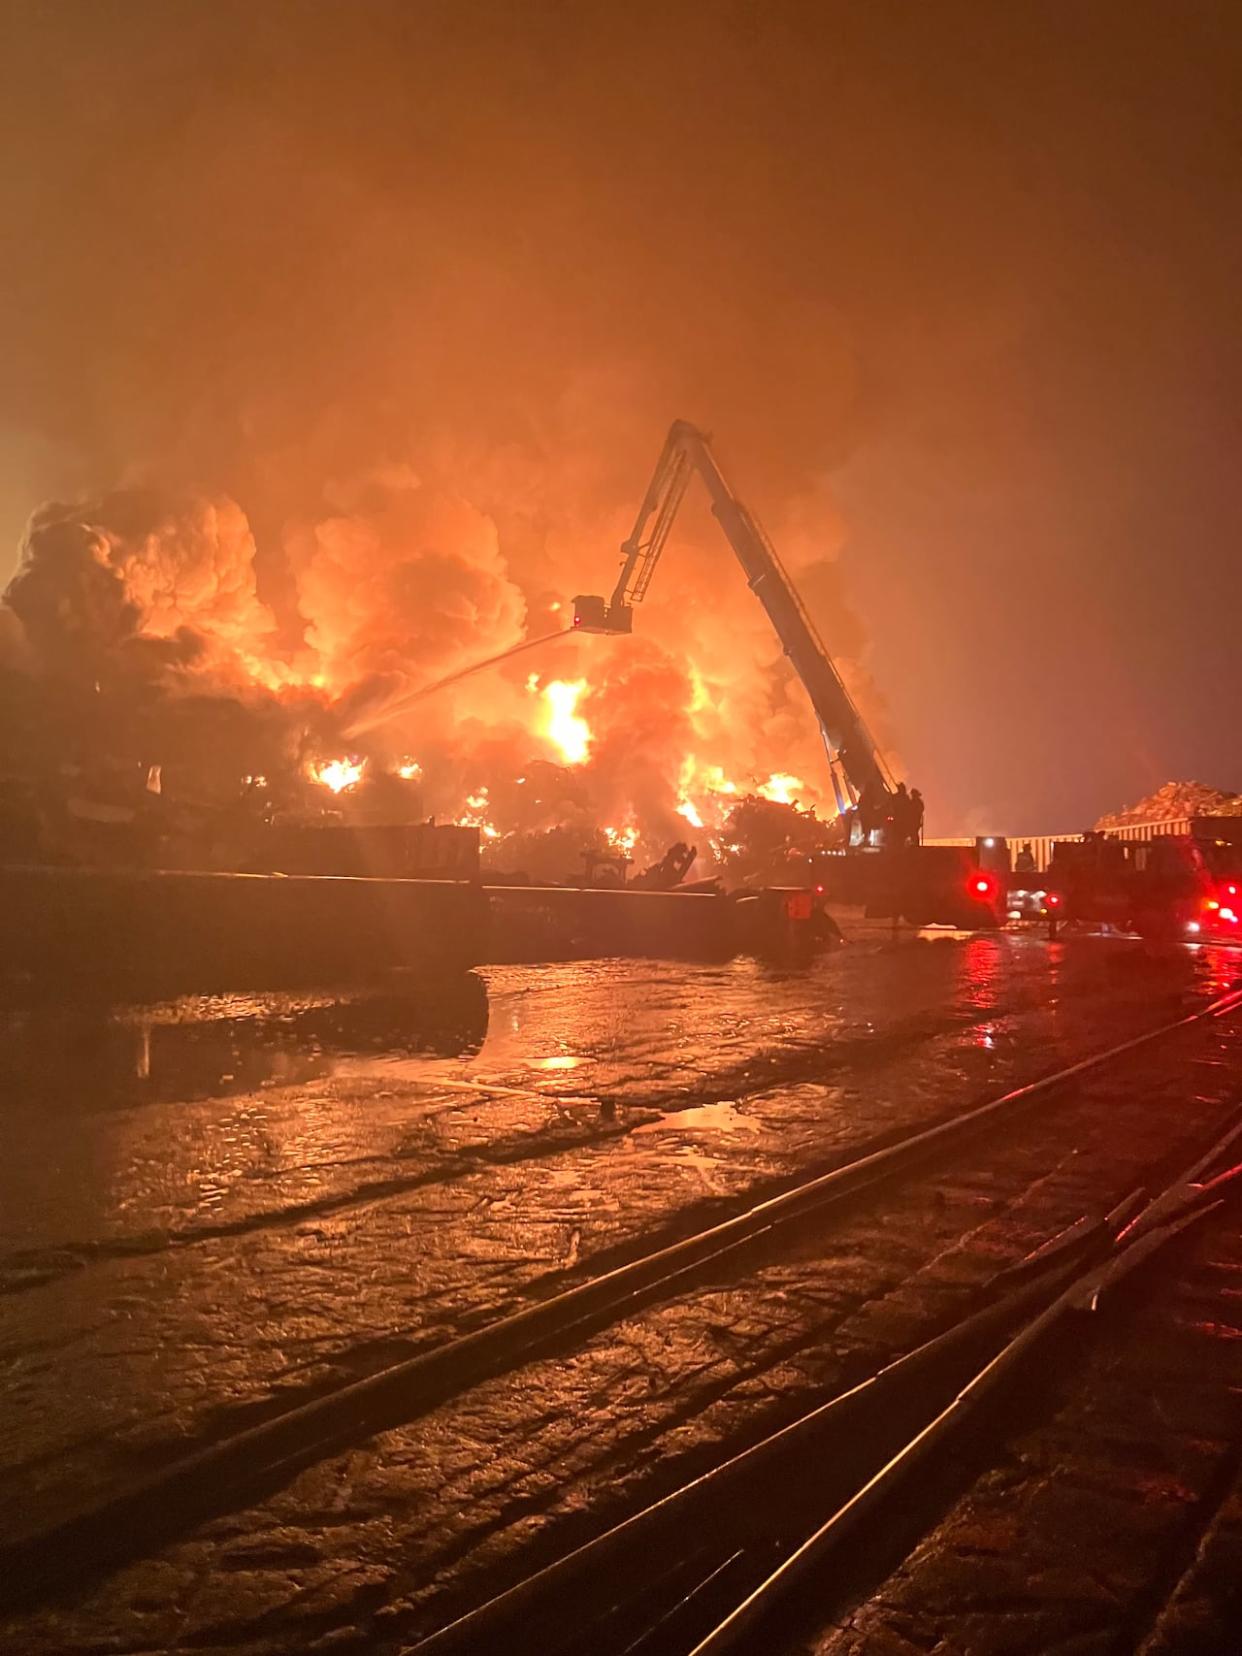 Piles of scrap metal at AIM's west side operation caught fire at around 1 a.m. on Sept. 14. Over the next 40 hours, Saint John firefighters used about two million litres of water to battle the blaze. (Submitted by Ed Moyer - image credit)